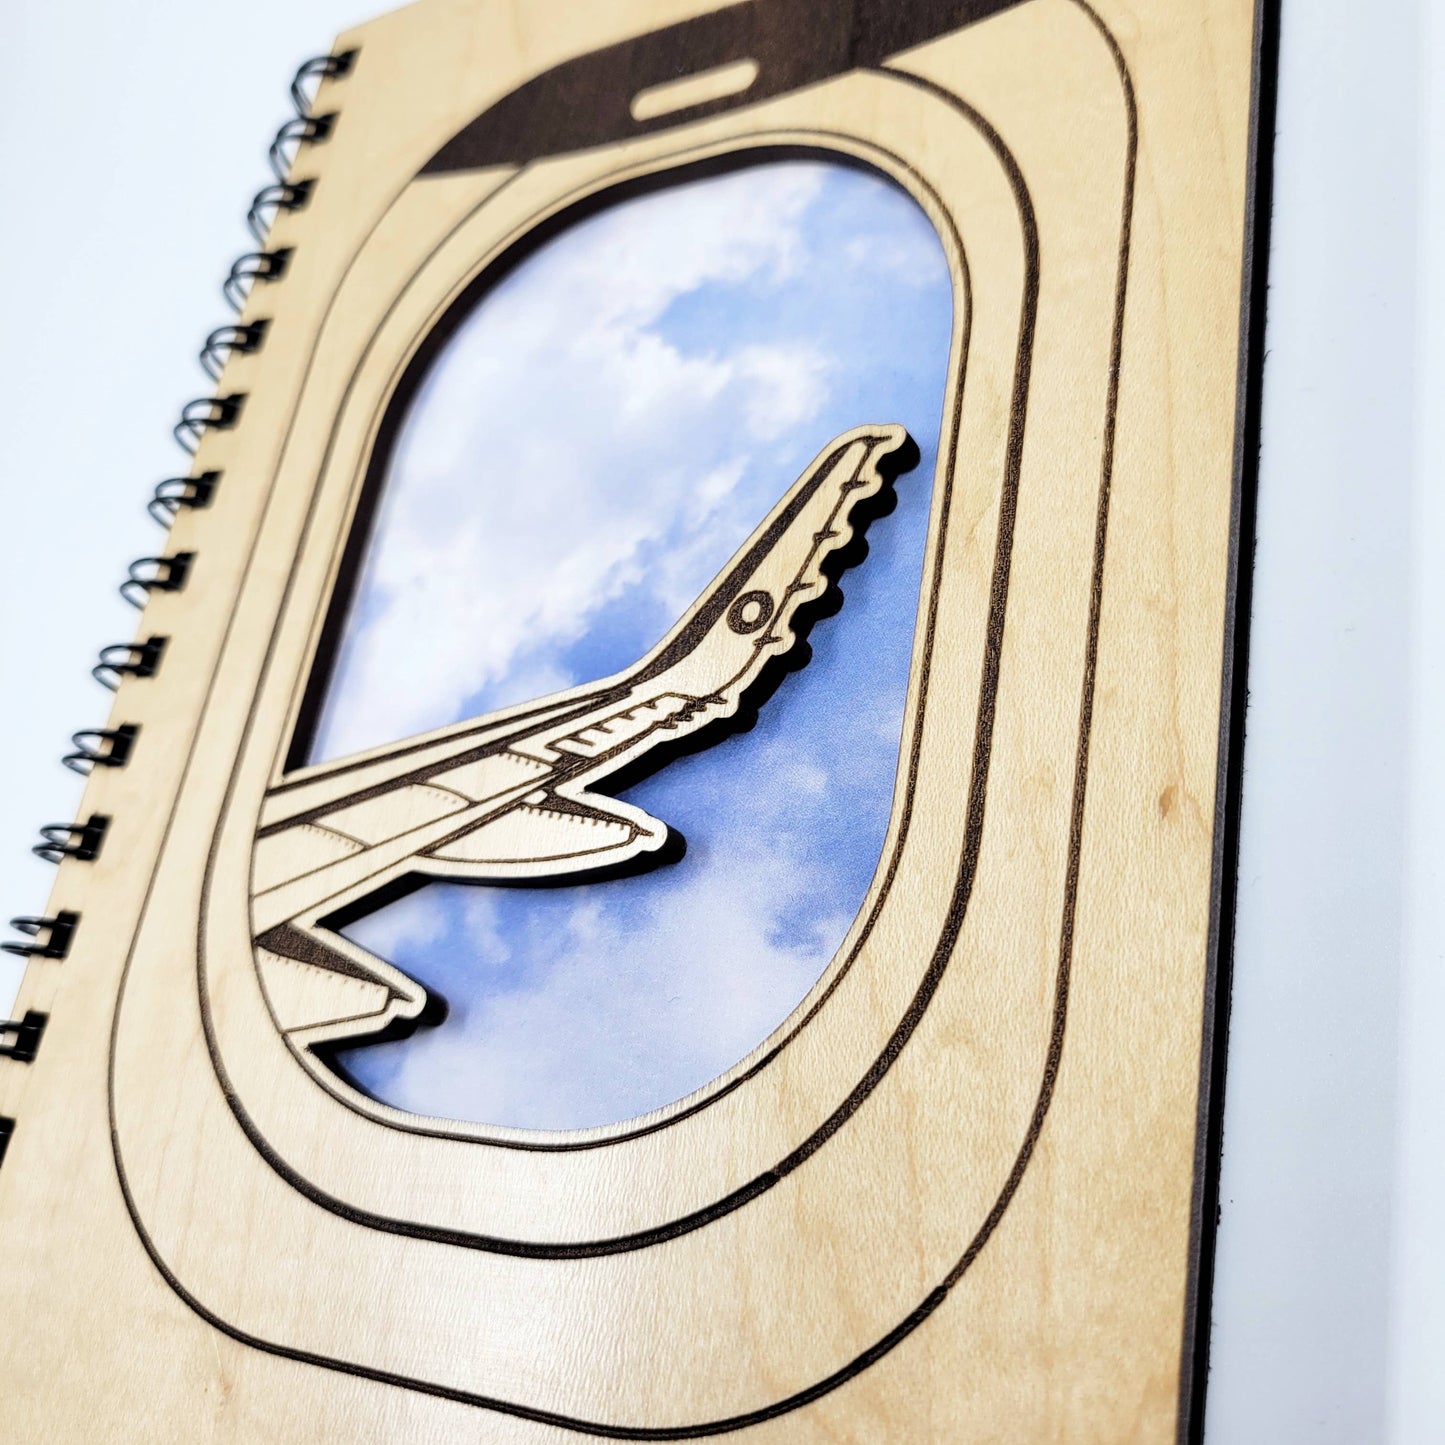 Fly Away Plane Wood Journal - Stationery, Journals, Notebook: Lined